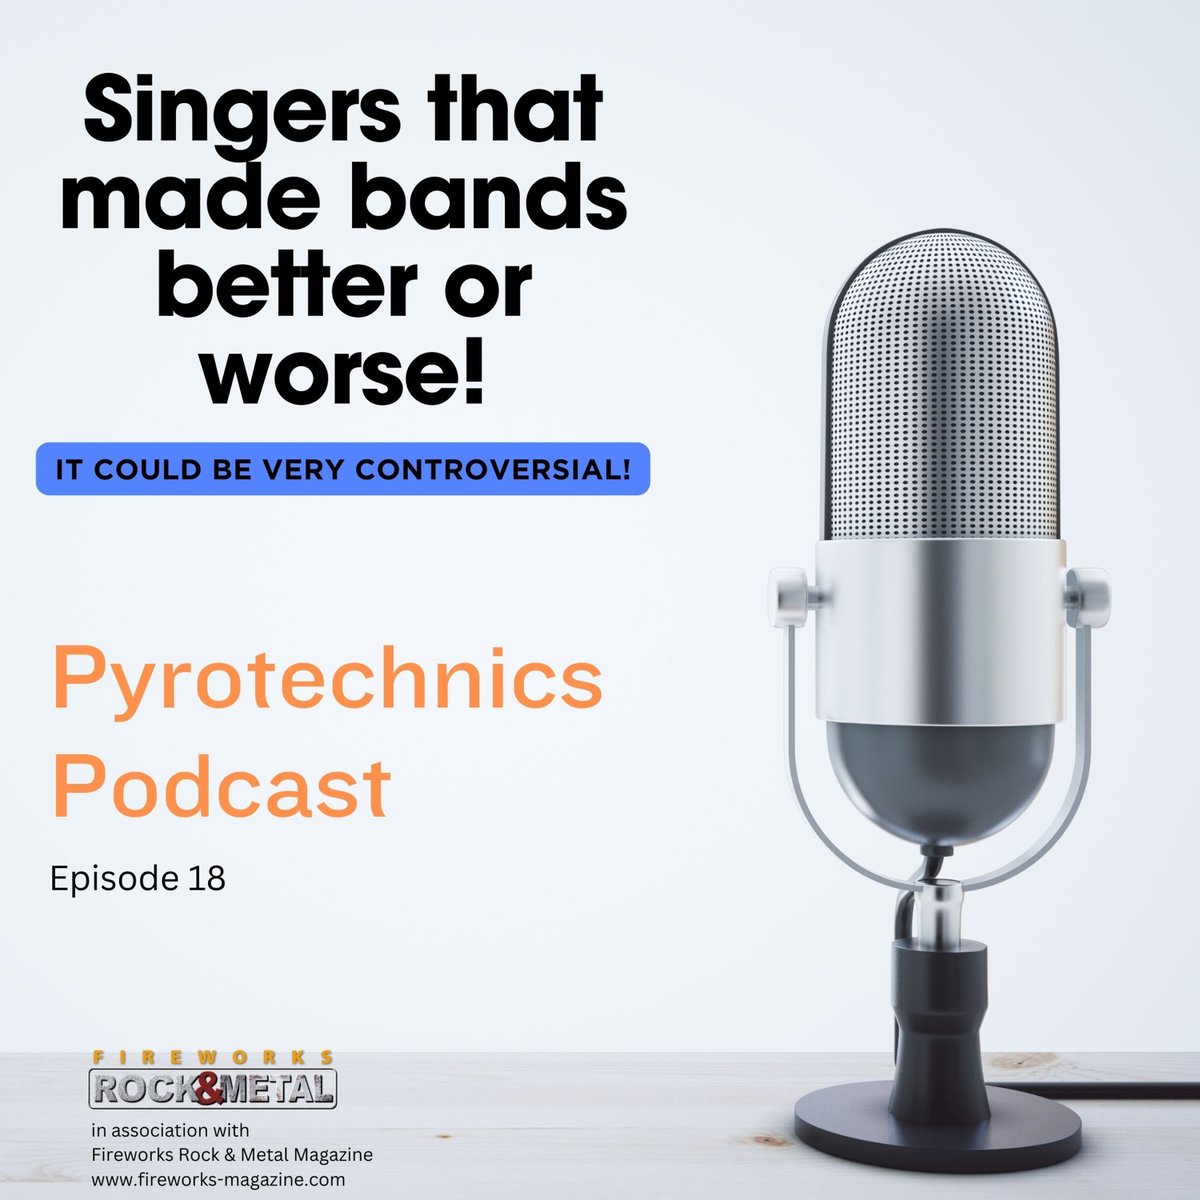 𝗣𝗬𝗥𝗢𝗧𝗘𝗖𝗛𝗡𝗜𝗖𝗦 Episode 18 featuring the topic 'Singers that made bands better or worse!' Do you agree with James and Dave's choices? Available on our website, Spotify and YouTube channels. -- BUY Issue #106 from fireworks-magazine.com